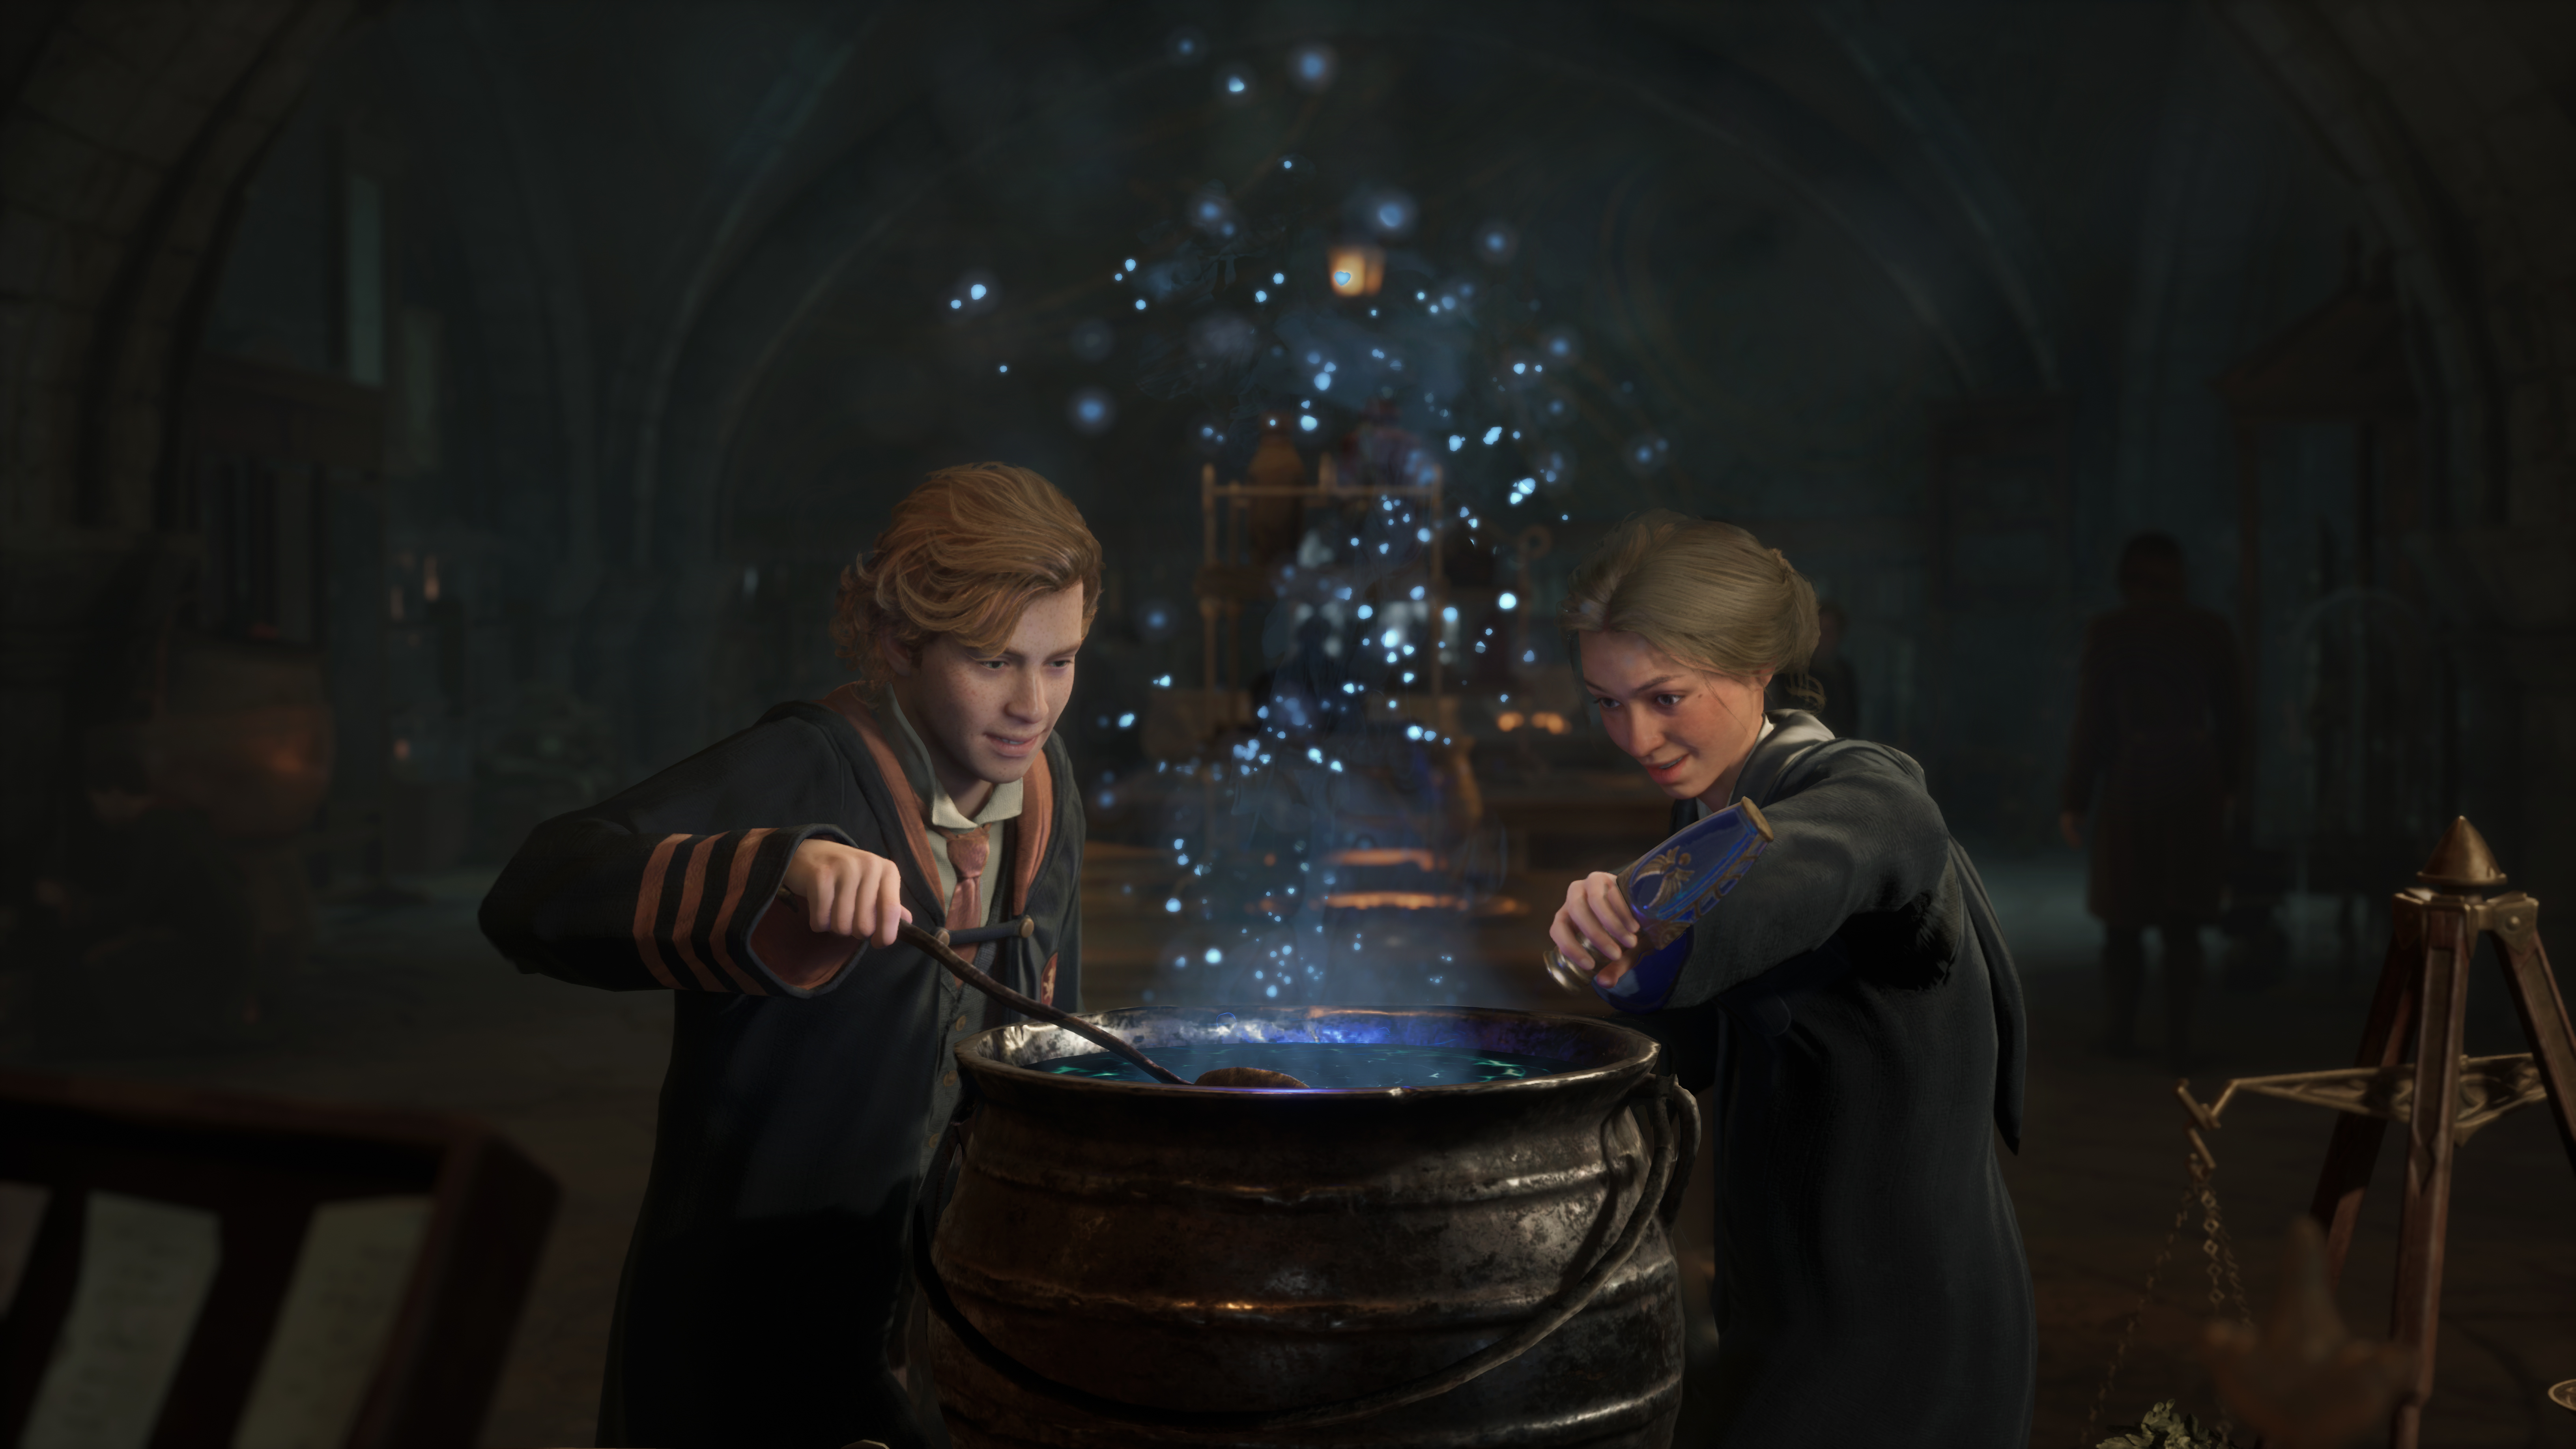 How to Play 'Hogwarts Legacy' Early Access: Preorder Bonus, Deluxe